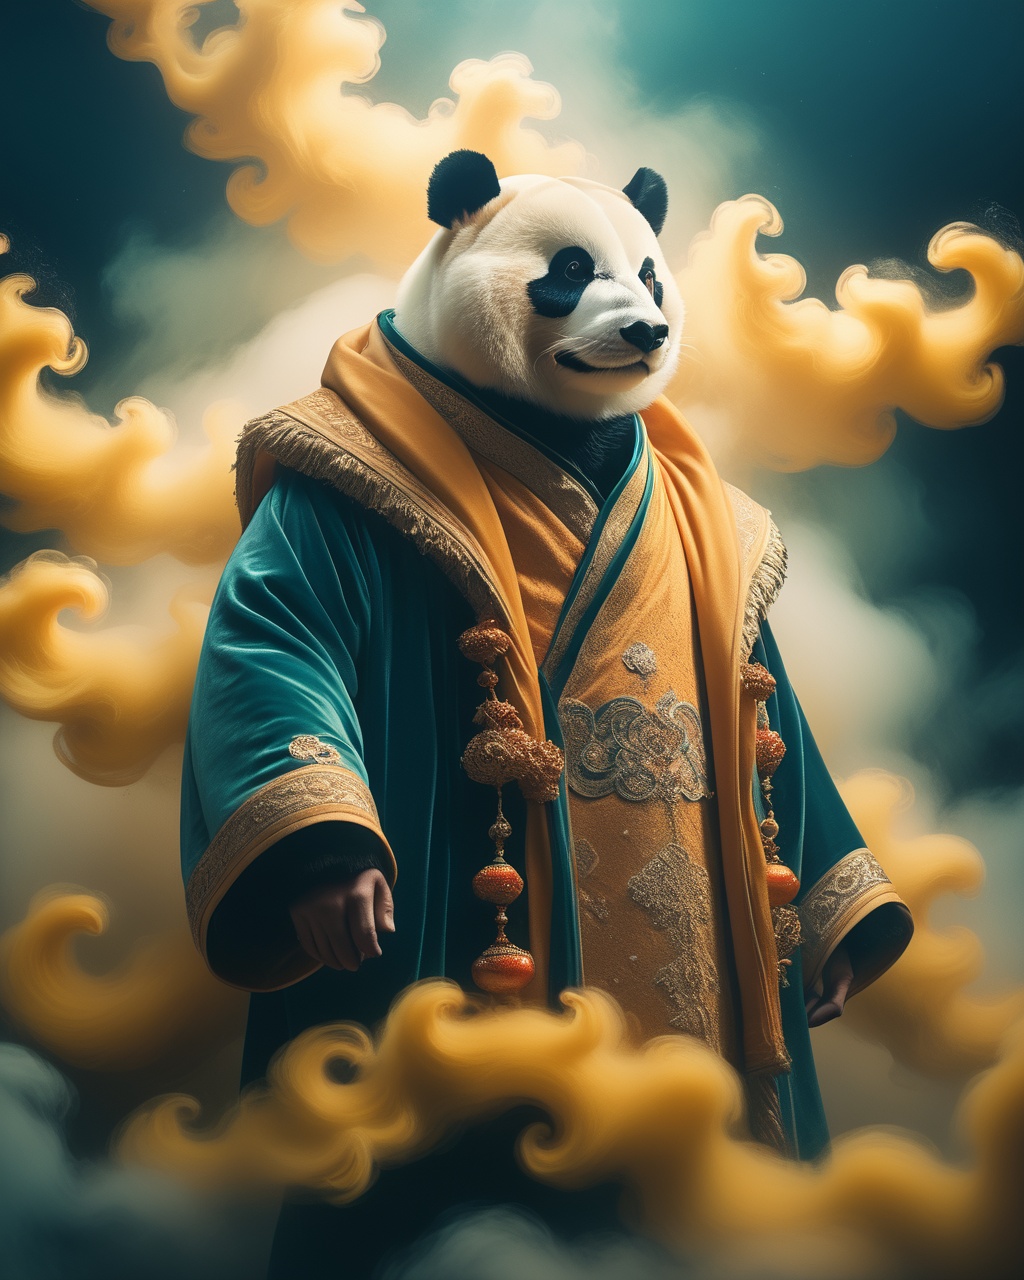 Googie Art Style, (cinematic still  Giant Panda 大熊猫Endearing bears with black and white fur known for their love of bamboo inhabiting mountainous regions in China:1.9),(male:0.9),(Knolling Photography:0.7),(muscular male:1.1),super detail,(glass shiny (textured skin):0.3),high details,(back:0.1),(burly:0.1),(magic:1.1),(well defined:1.2),(clothing:1.3),<lora:XL_LORA_DetailedEyes_V3:0.9>,(cloud and fog:0.4),(close-up:0.8),(upper_body:0.5),(portrait:0.9),(dim:0.2),(vibrant energy:0.4),(fullbody:0.3),<lora:SDXL手绘神秘风塔罗牌_v1.0:0.4>,(true style:1.5),(masterpiece:0.8),(analog:0.5),(old photo:0.4),(old fade polaroid:0.4),(furry:0.6),(dynamic:0.5),(dramatic:0.4),(Luminsm:0.8),(Non-Fiction:0.8),(optical illusion:0.8),(impression of movement:0.8),(traditional dress:0.4),<lora:dongdongXL0101FANT8Kdep:0.4>,<lora:Love_is_in_the_air_SDXL:0.2>,(dynamic posture:0.2),(muscular:0.8),(black myth:0.5),(diablo fantasy:0.6),(dark atmosphere:0.8),<lora:XL_Erleiye_lora:0.5>,. emotional,harmonious,vignette,highly detailed,high budget,bokeh,cinemascope,moody,epic,gorgeous,film grain,grainy,<lora:SDXL描金国潮：中国神话_v1.0:0.3>,(darkness:0.8),, dynamic, dramatic, 1950's futurism, bold boomerang angles, Googie art style